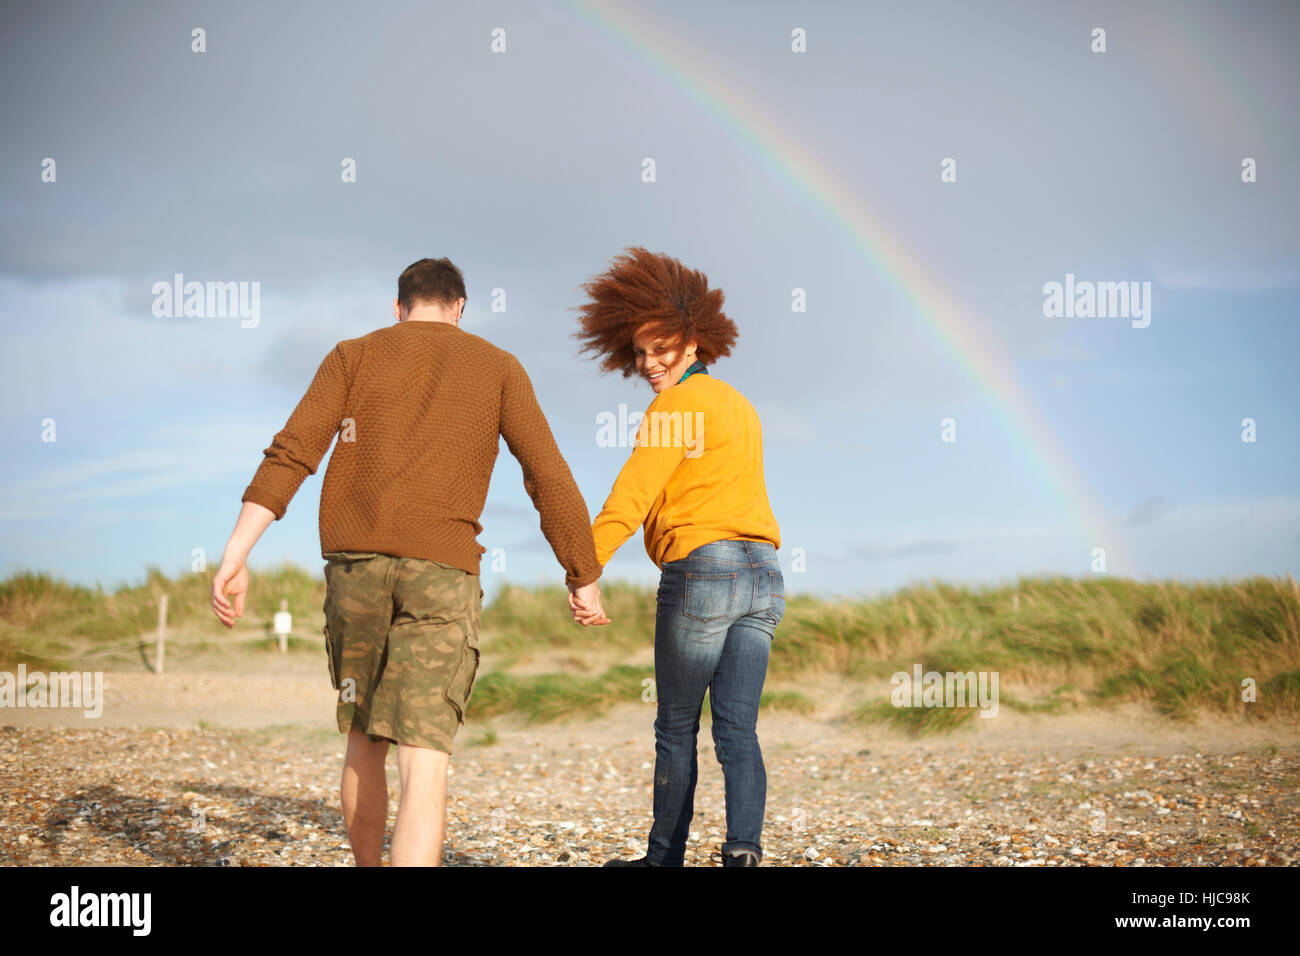 Couple walking on beach vers rainbow Banque D'Images